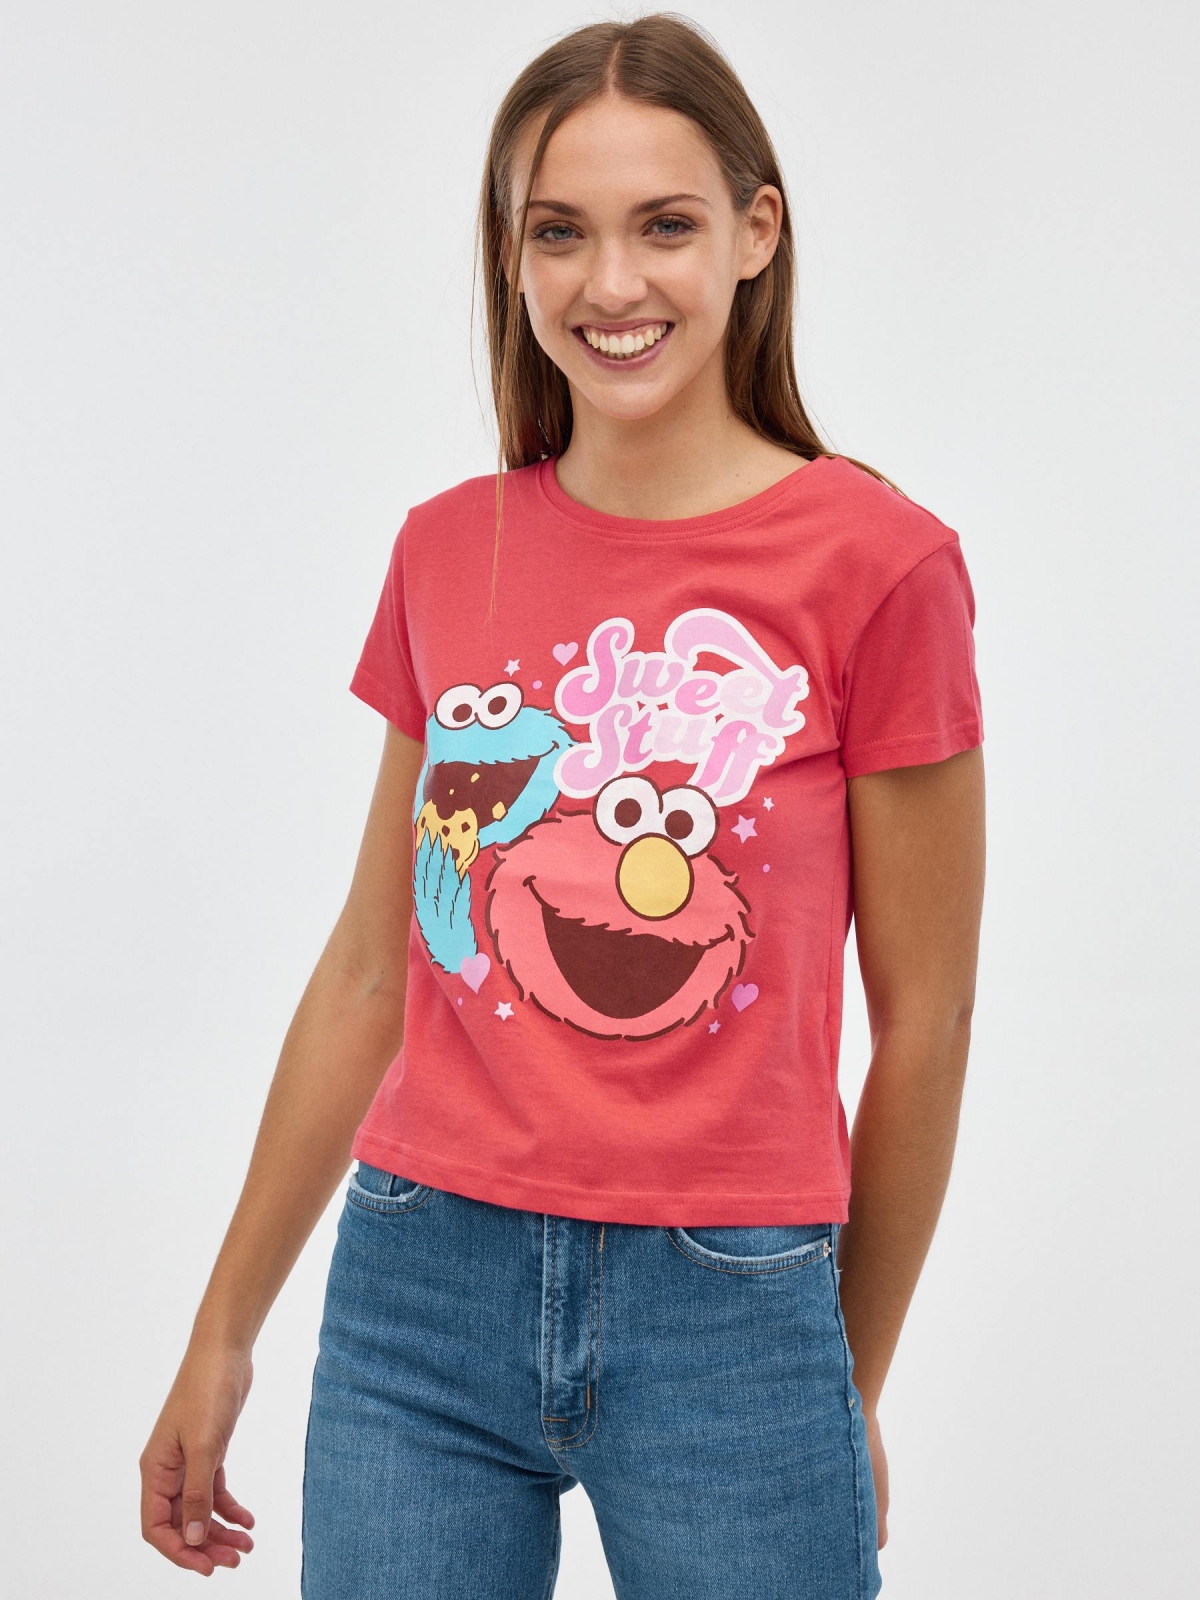 Elmo and Coco T-shirt red middle front view